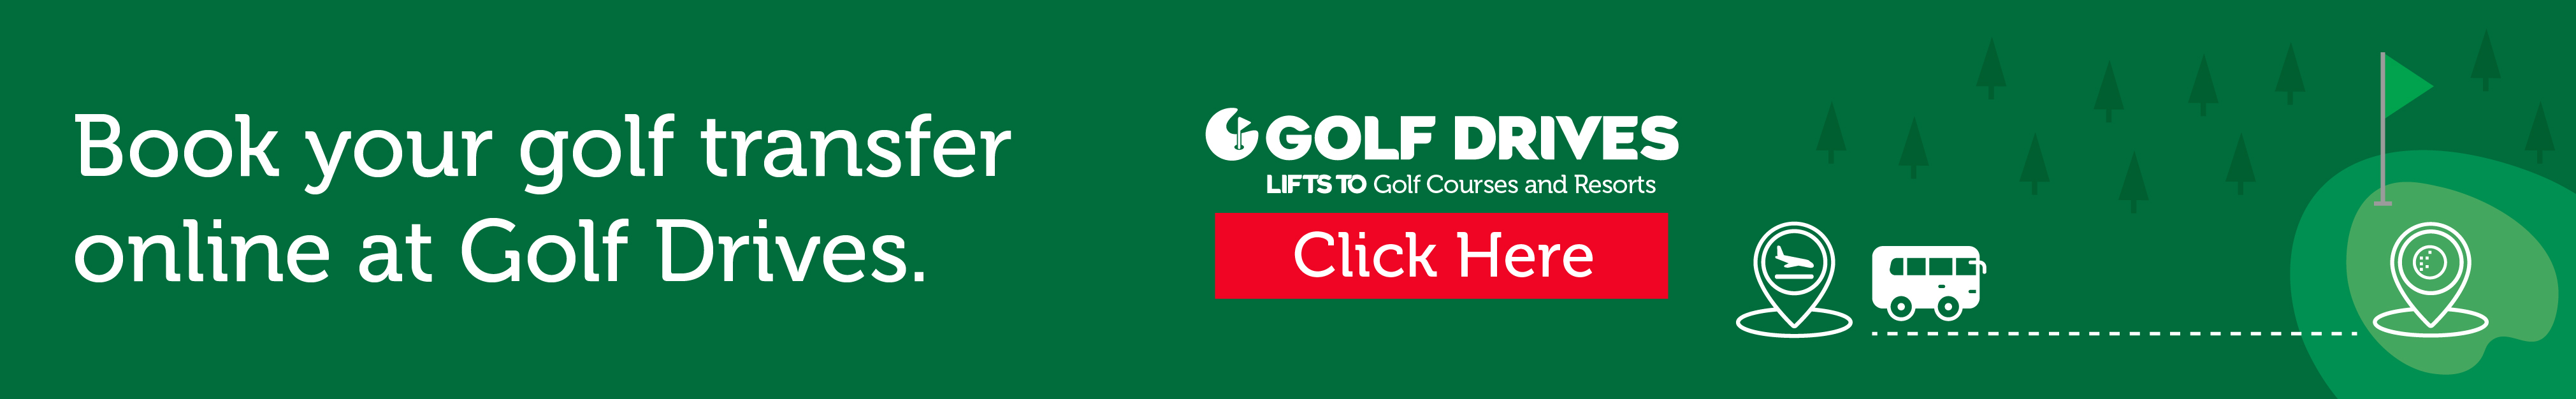 Book your golf transfer online at Golf Drives